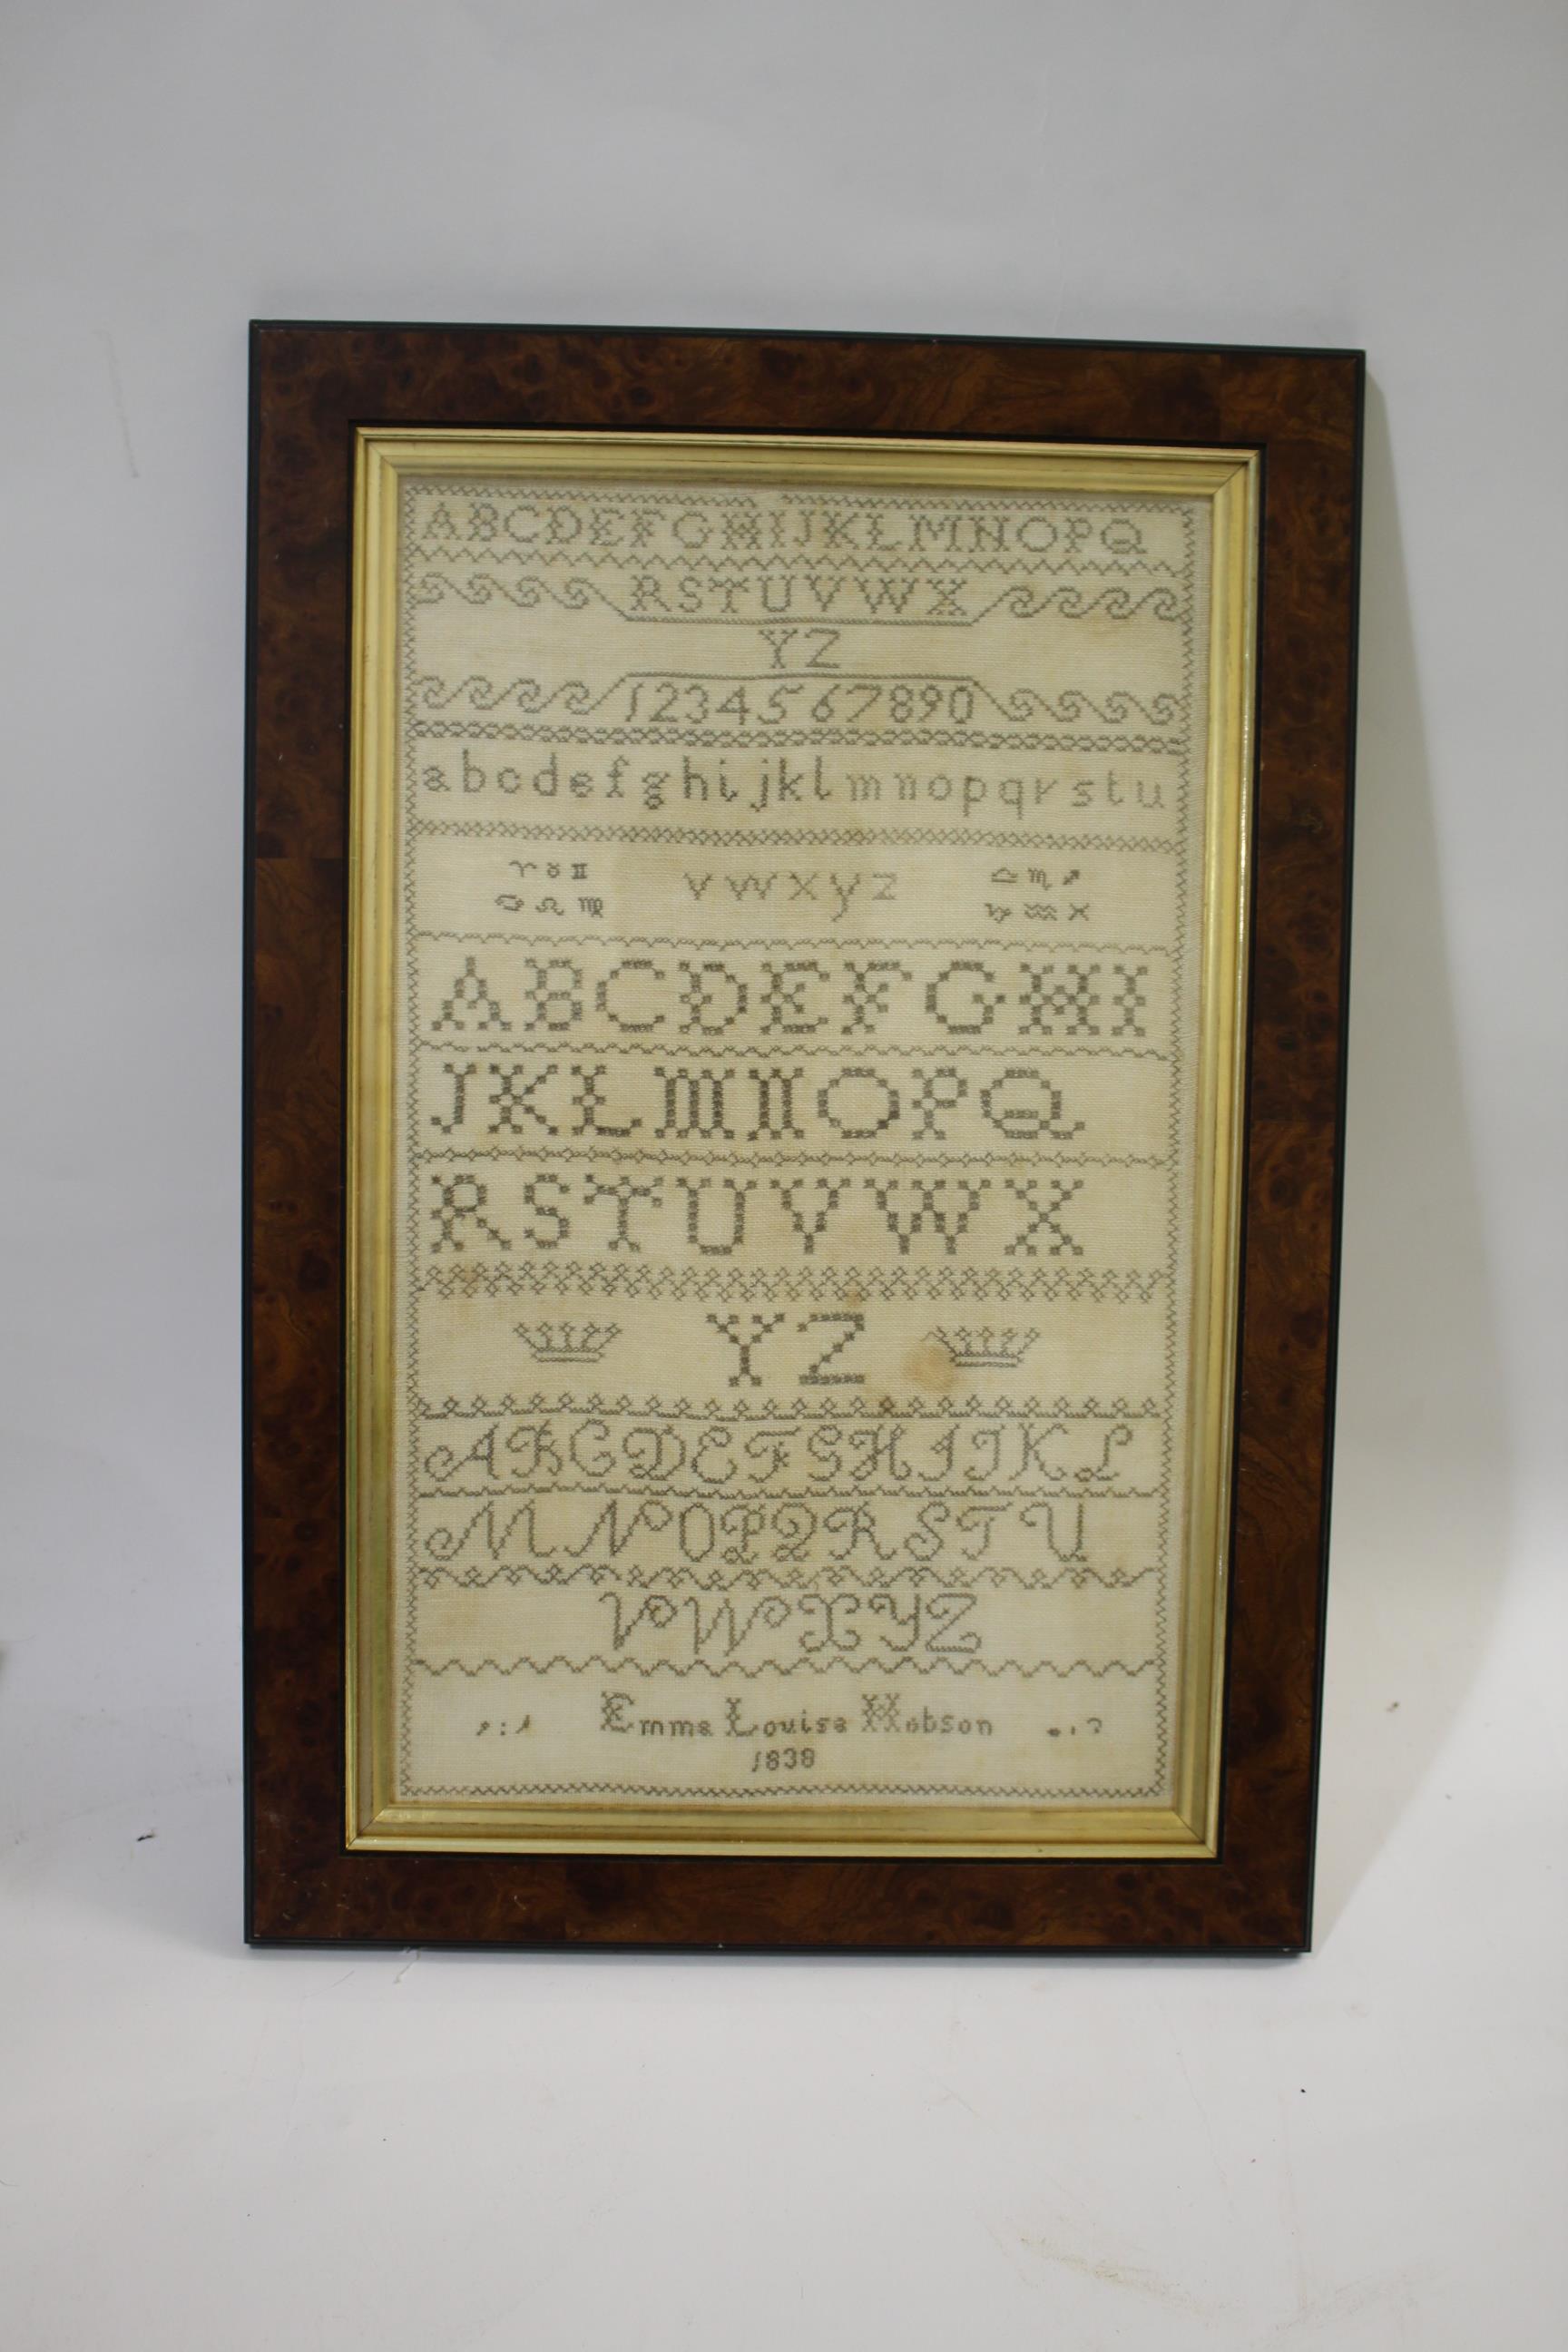 TWO 19THC SAMPLERS including an embroidered sampler with various letters and numbers in rows, marked